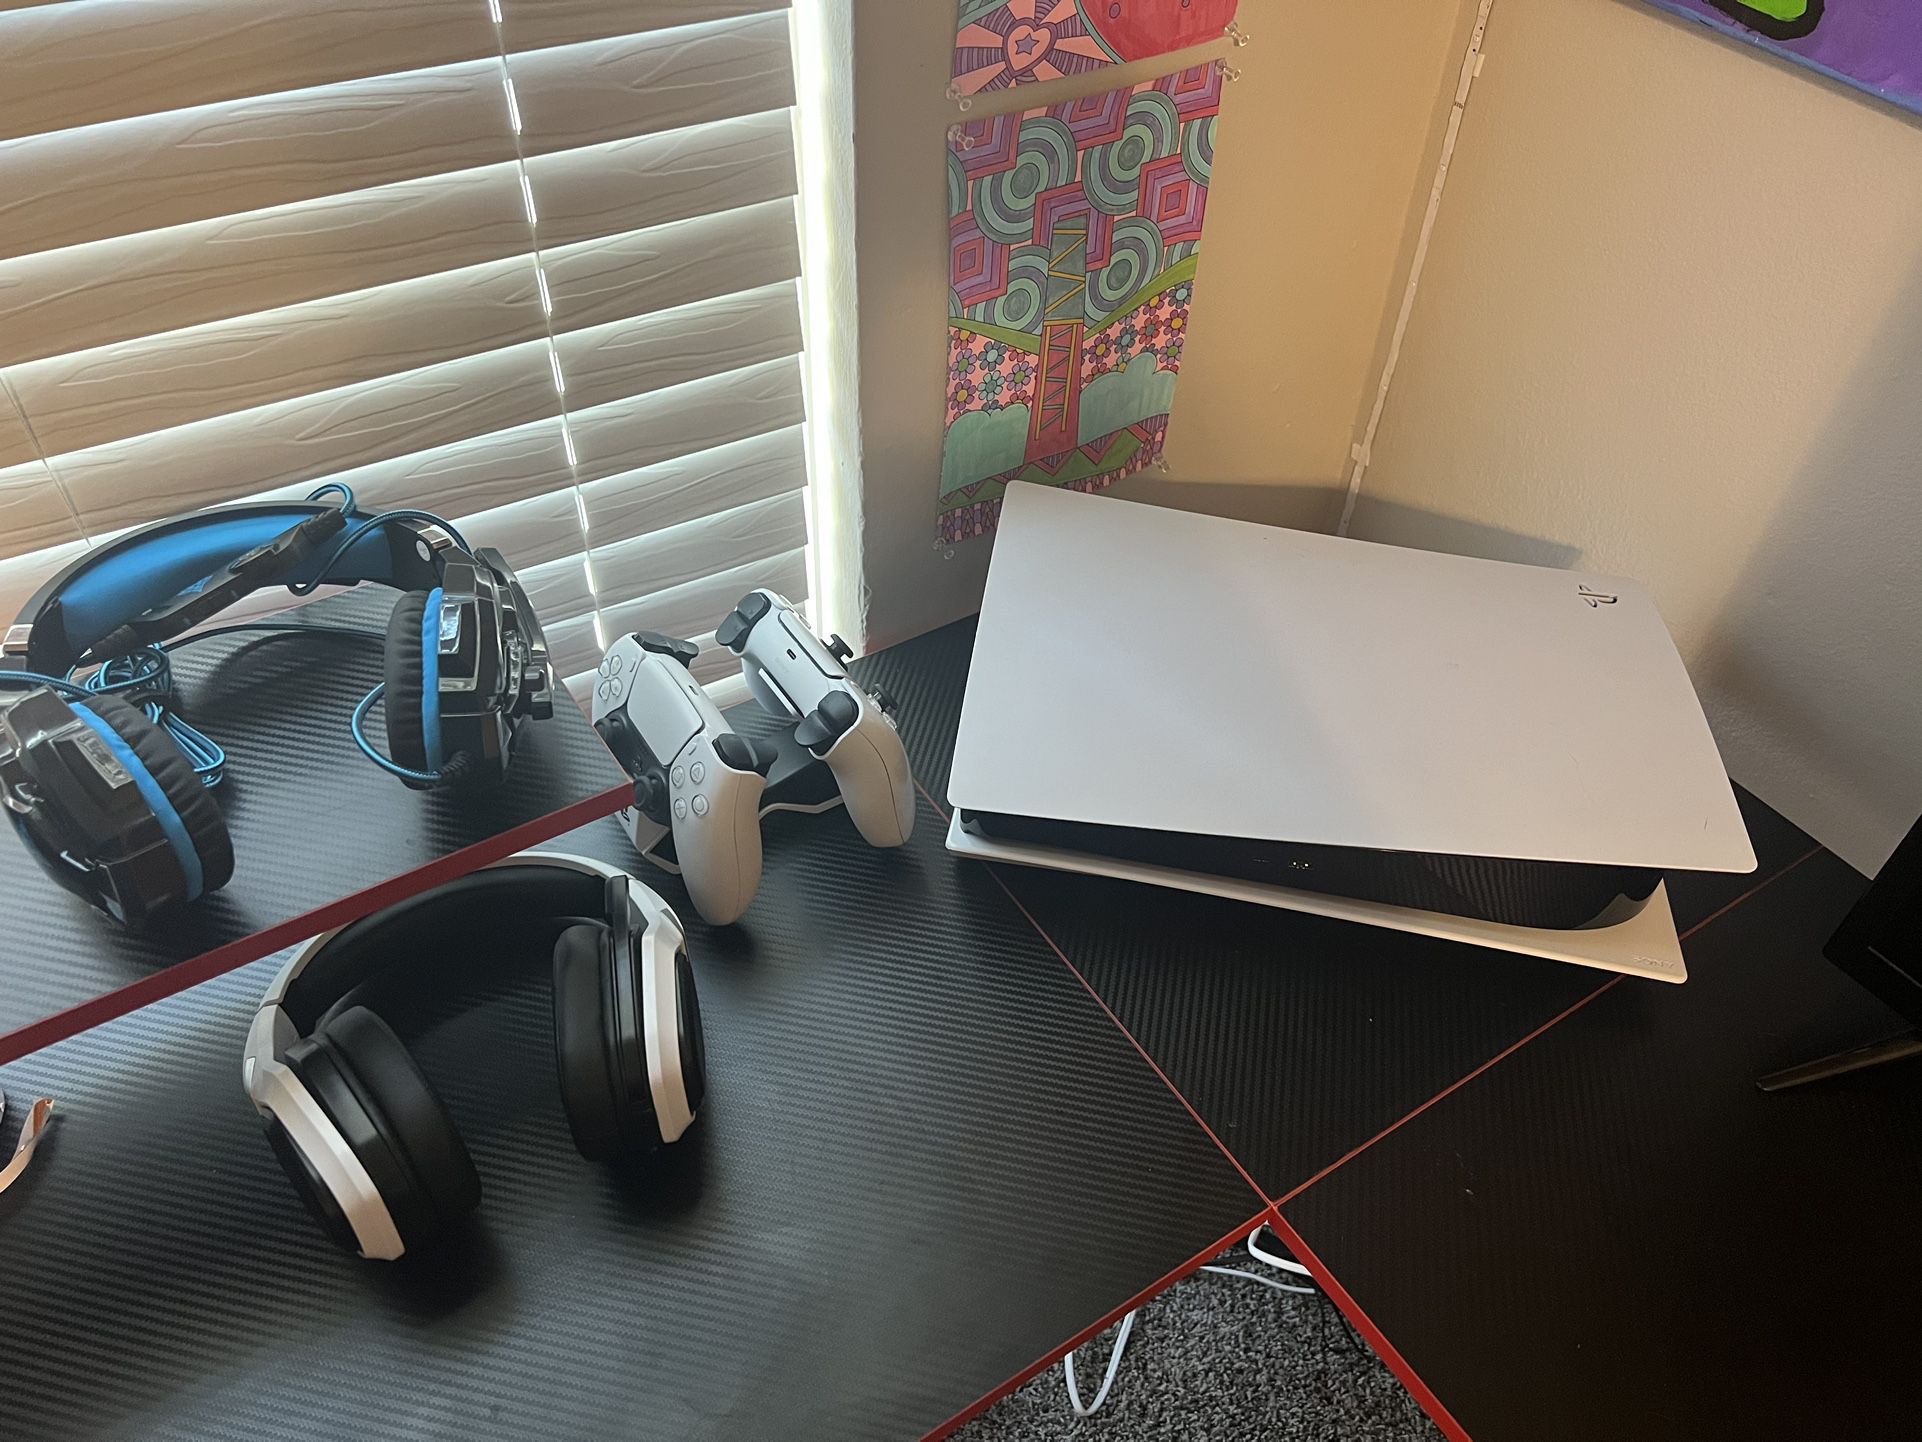 Ps5 Console + Gaming Desk/Accessories